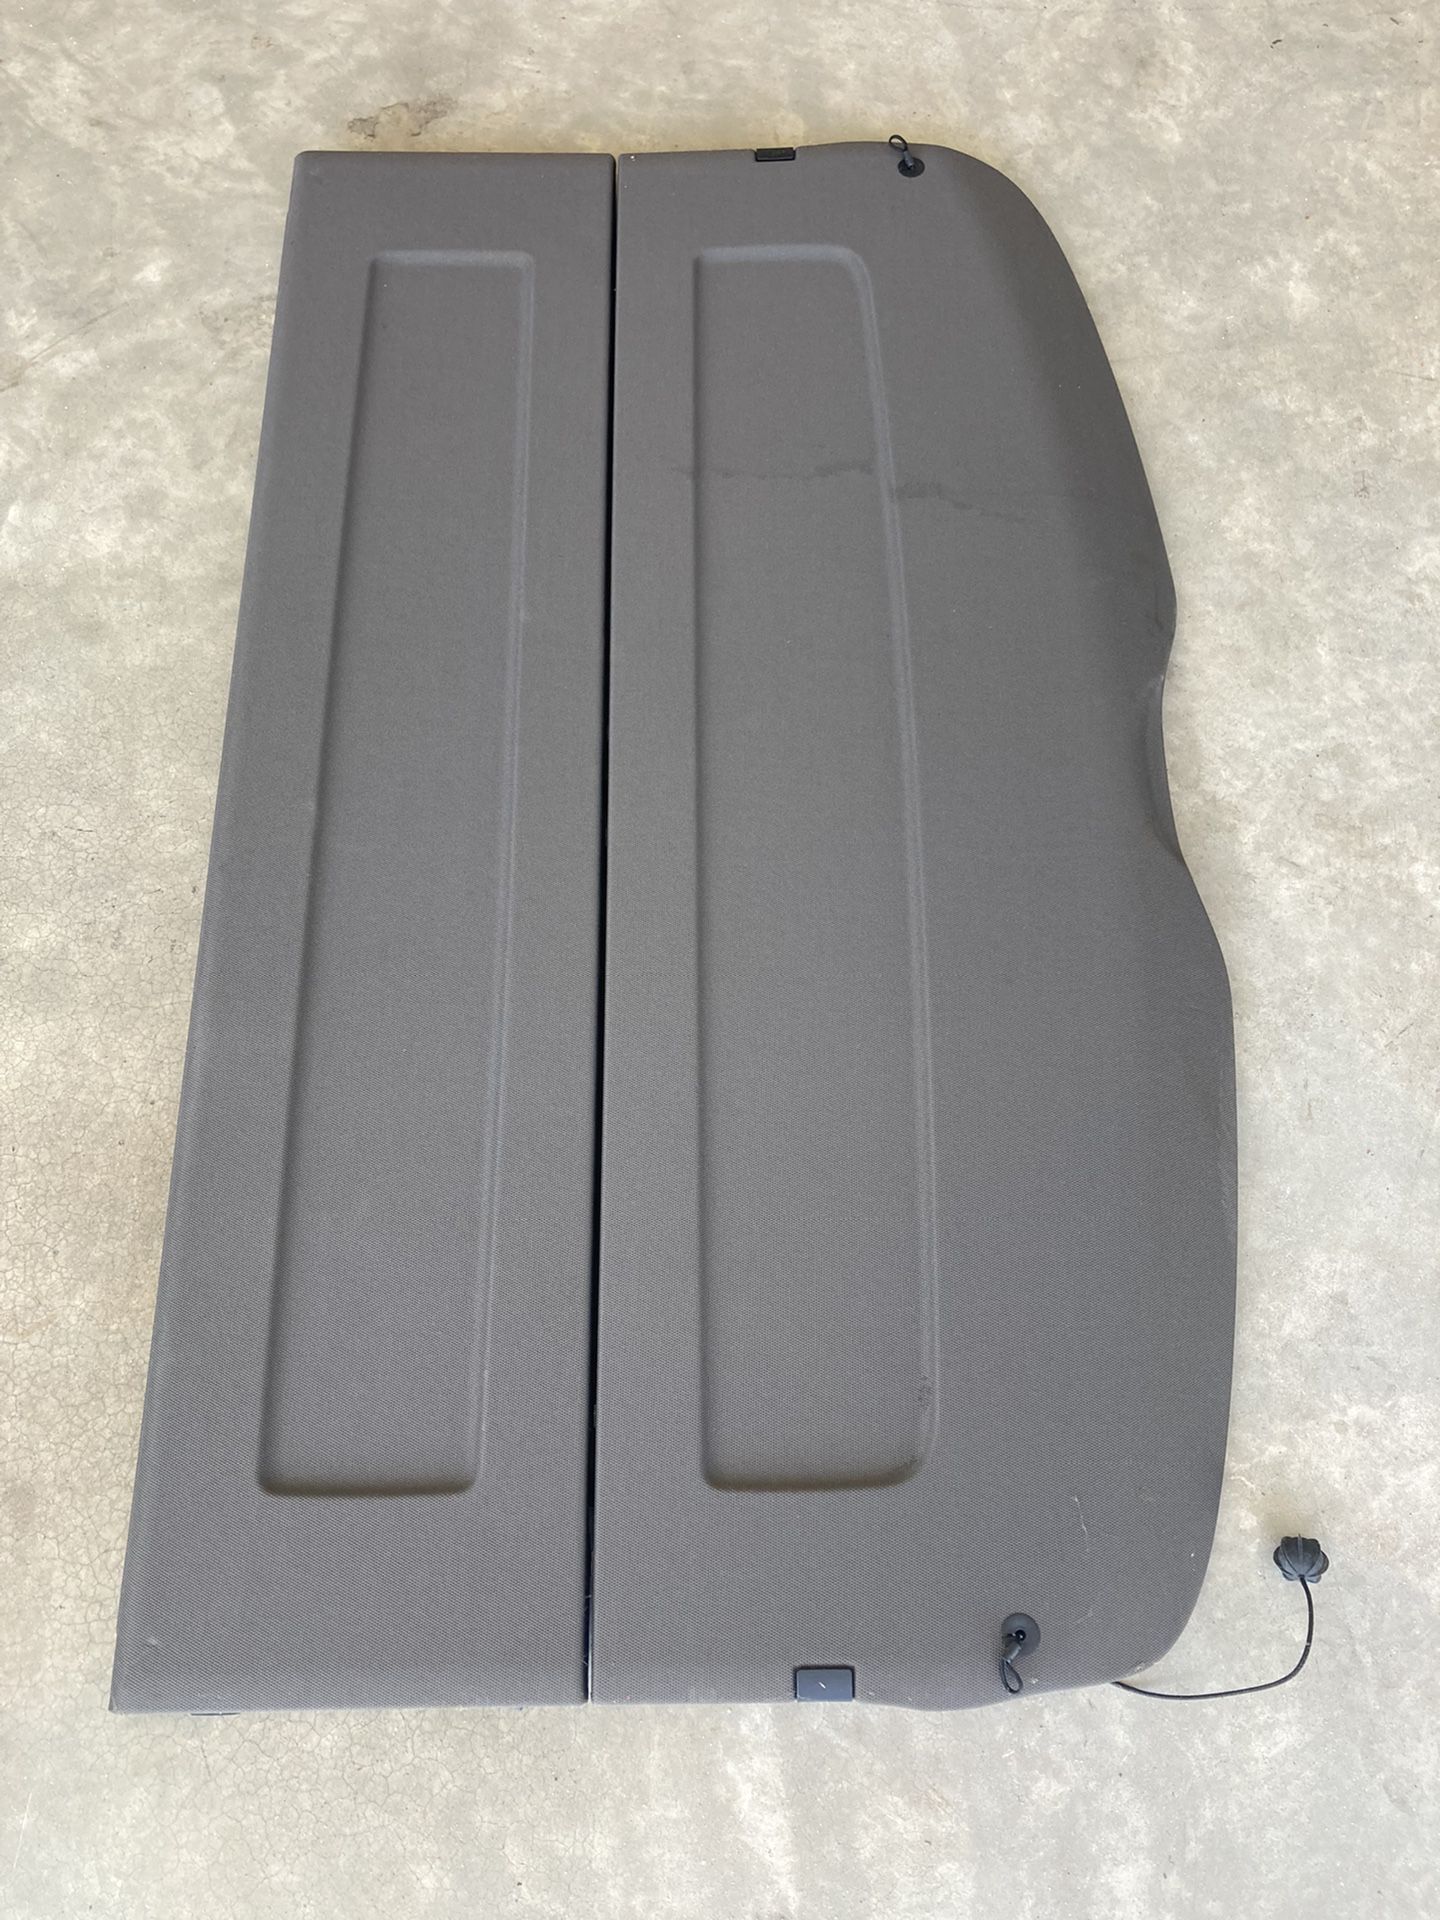 Audi Q5 Rear Cargo Luggage Security Cover